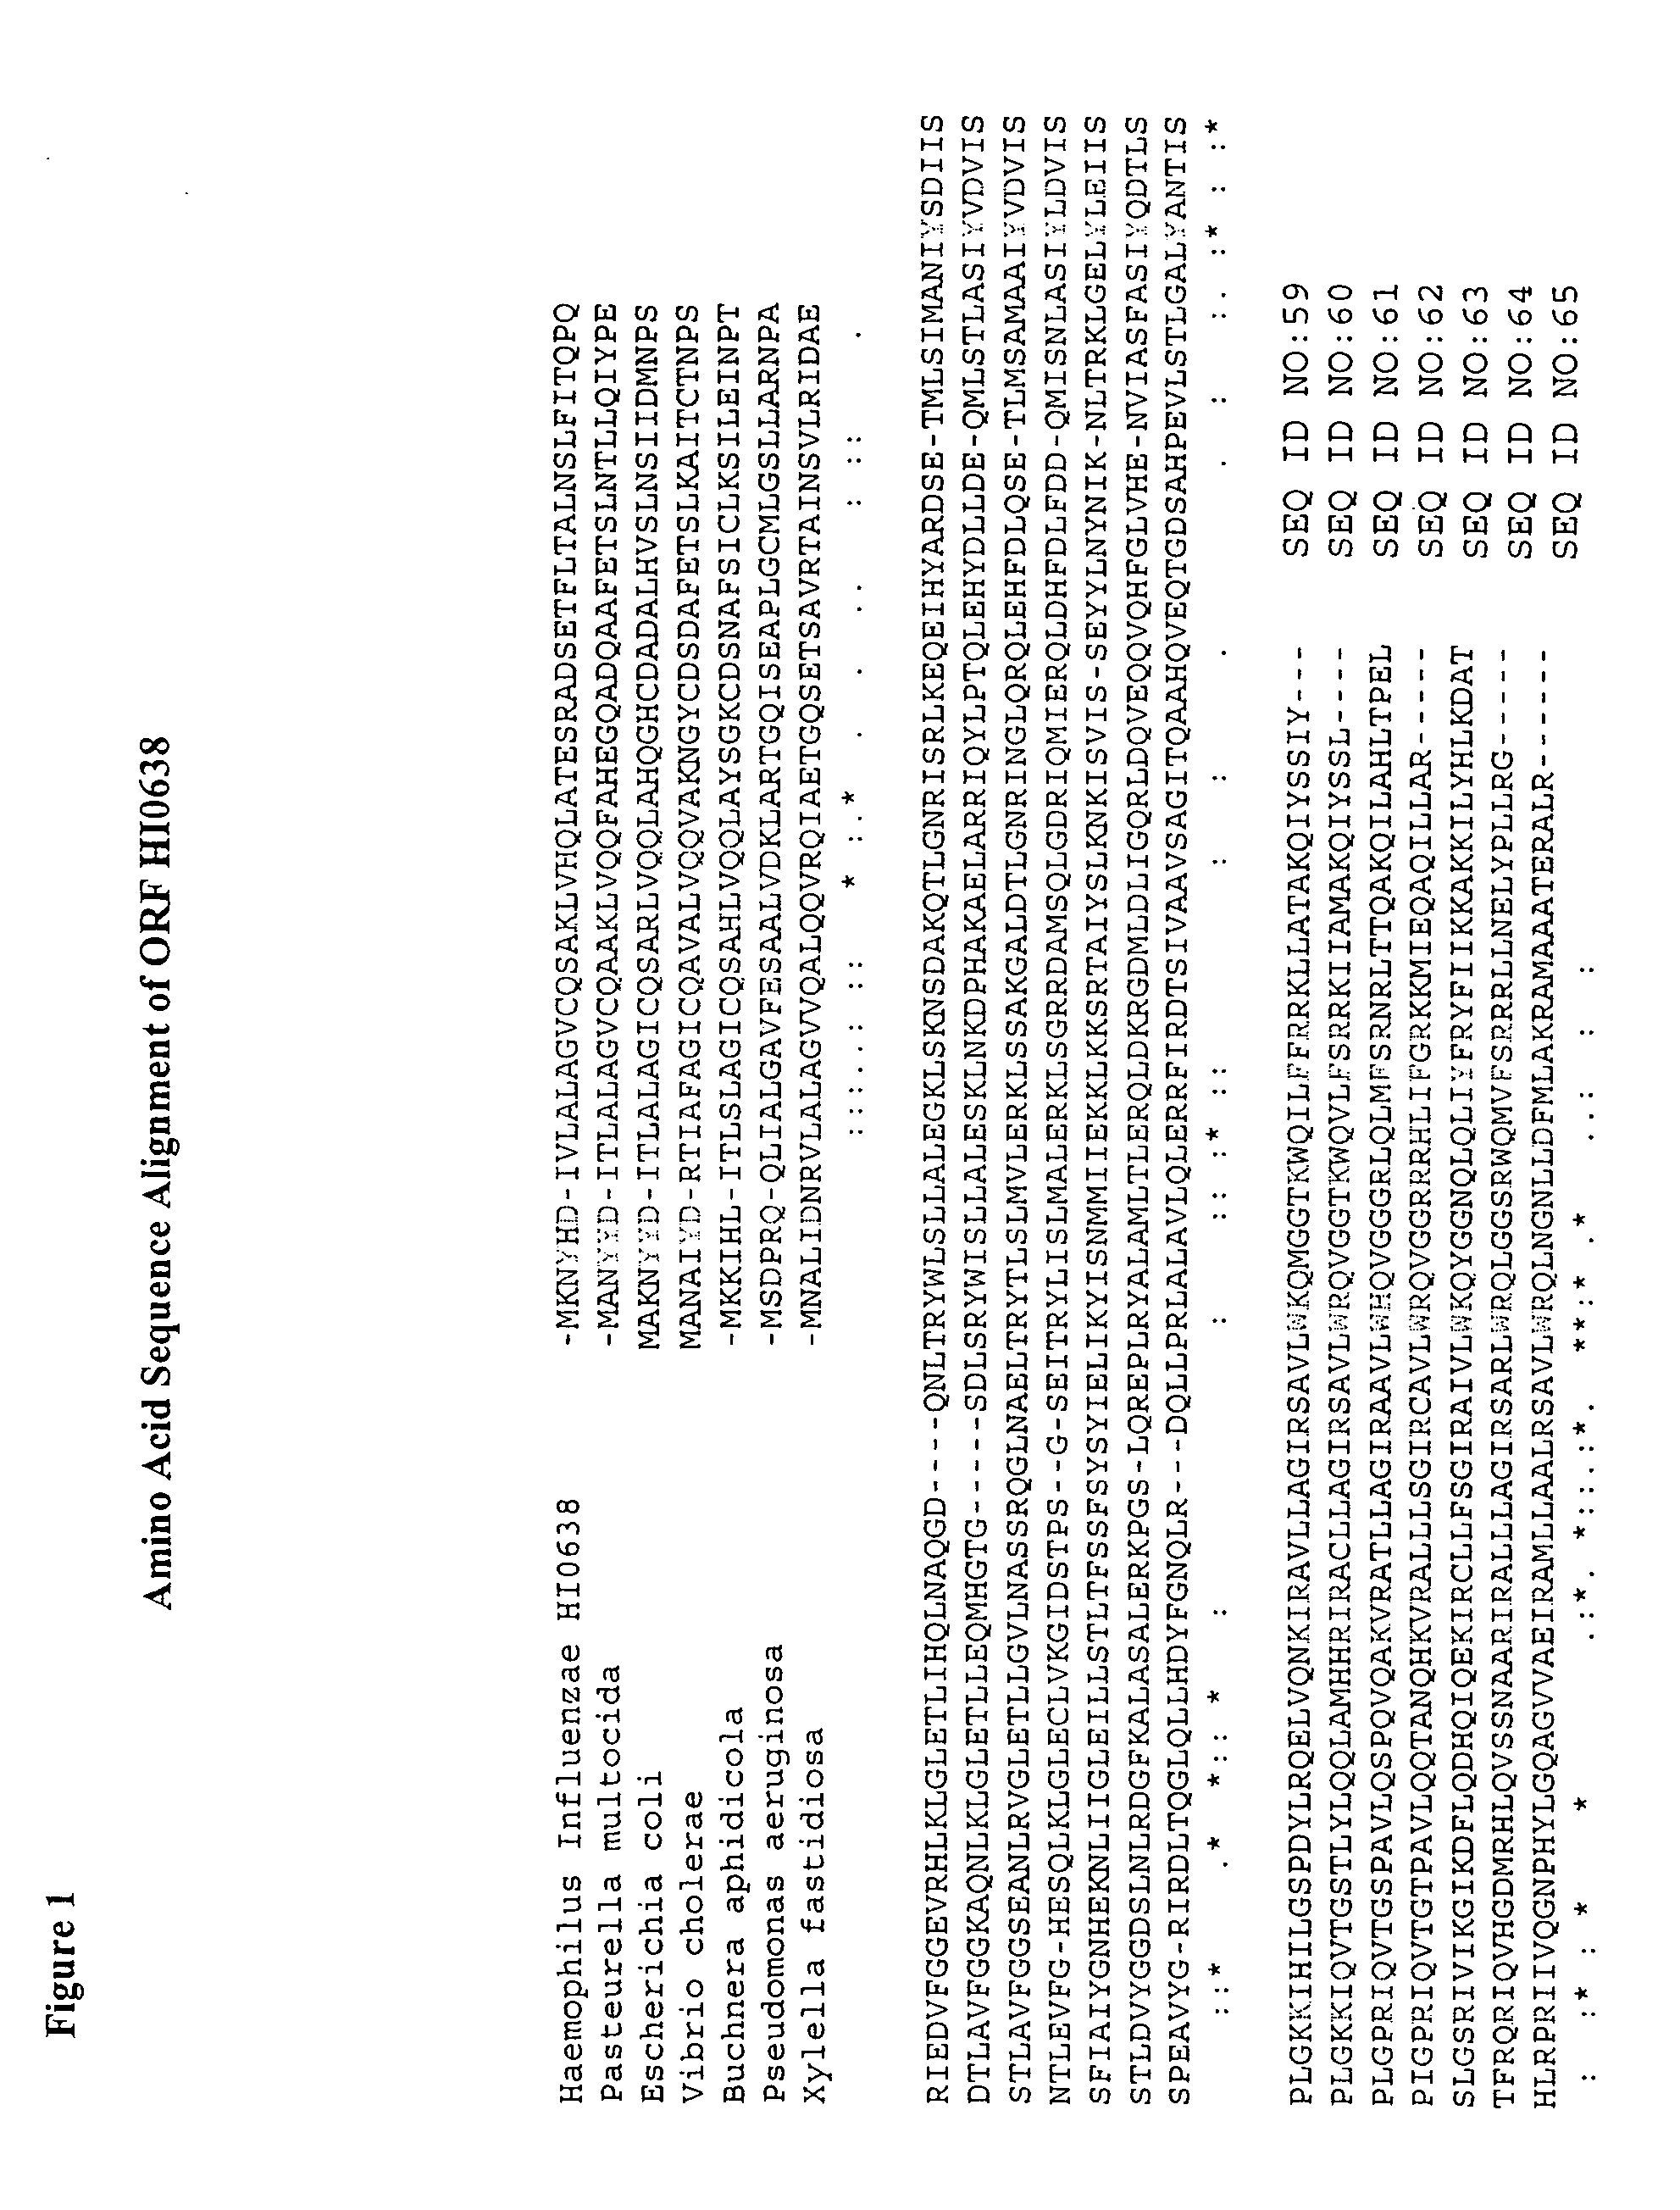 Compositions capable of facilitating penetration across a biological barrier